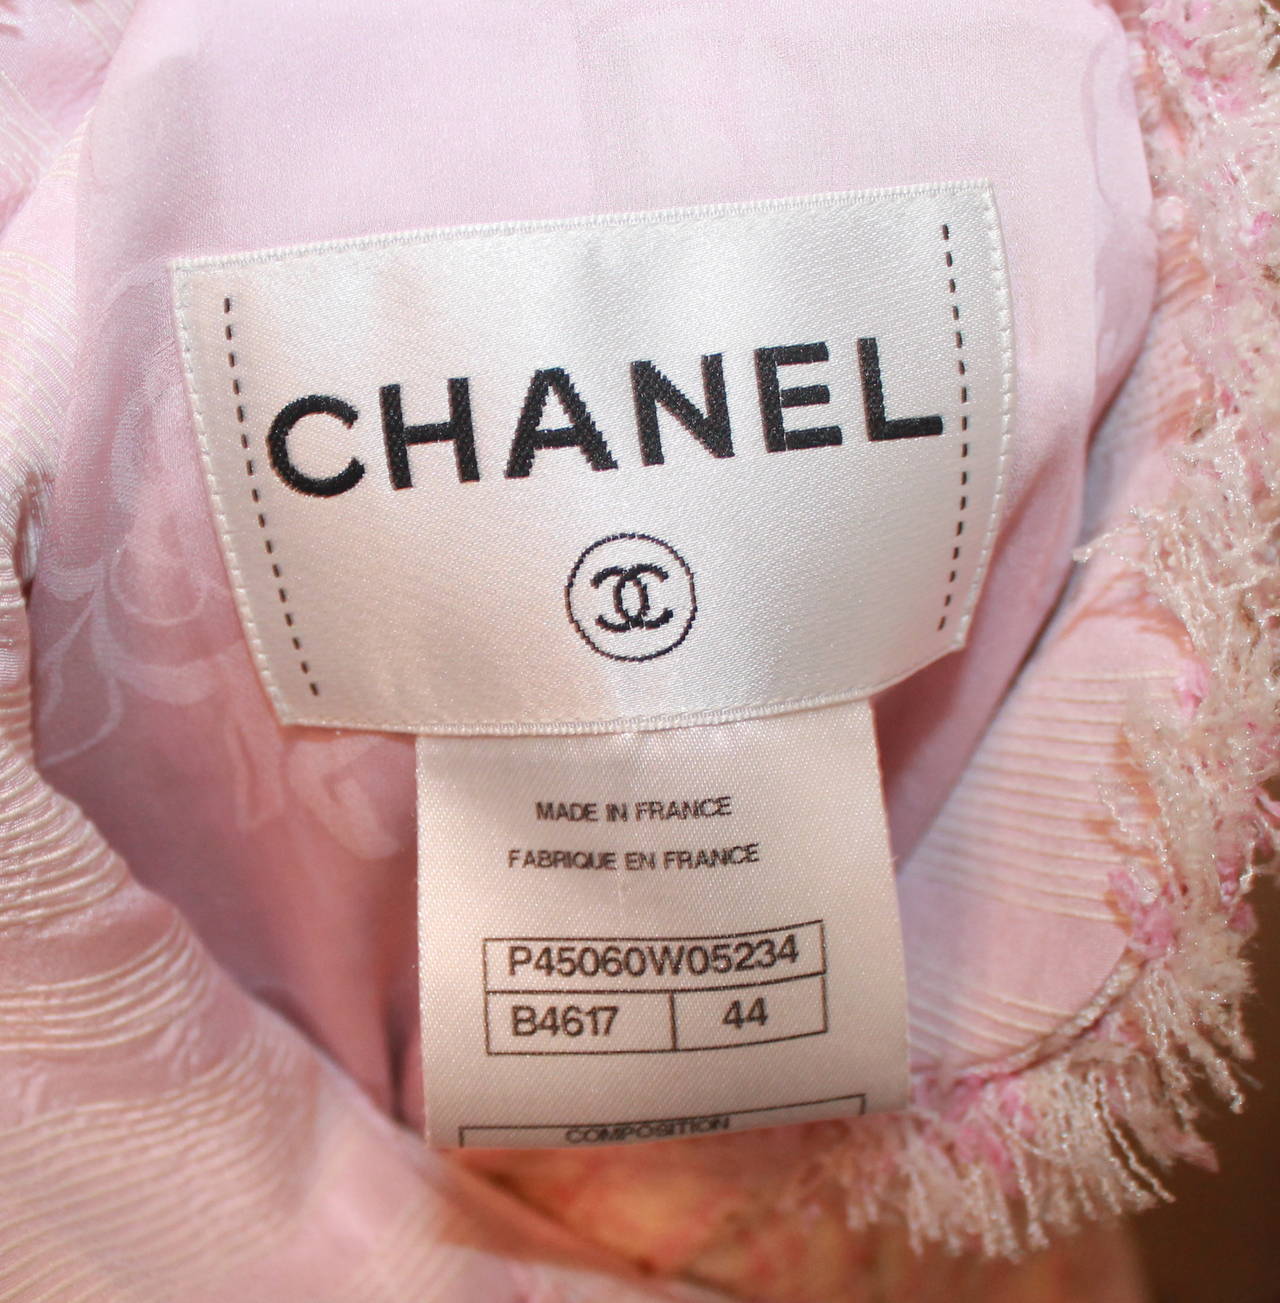 Chanel 2013 Light Pink & White Tweed Jacket with Fringe Detail - 44 - NWT 1